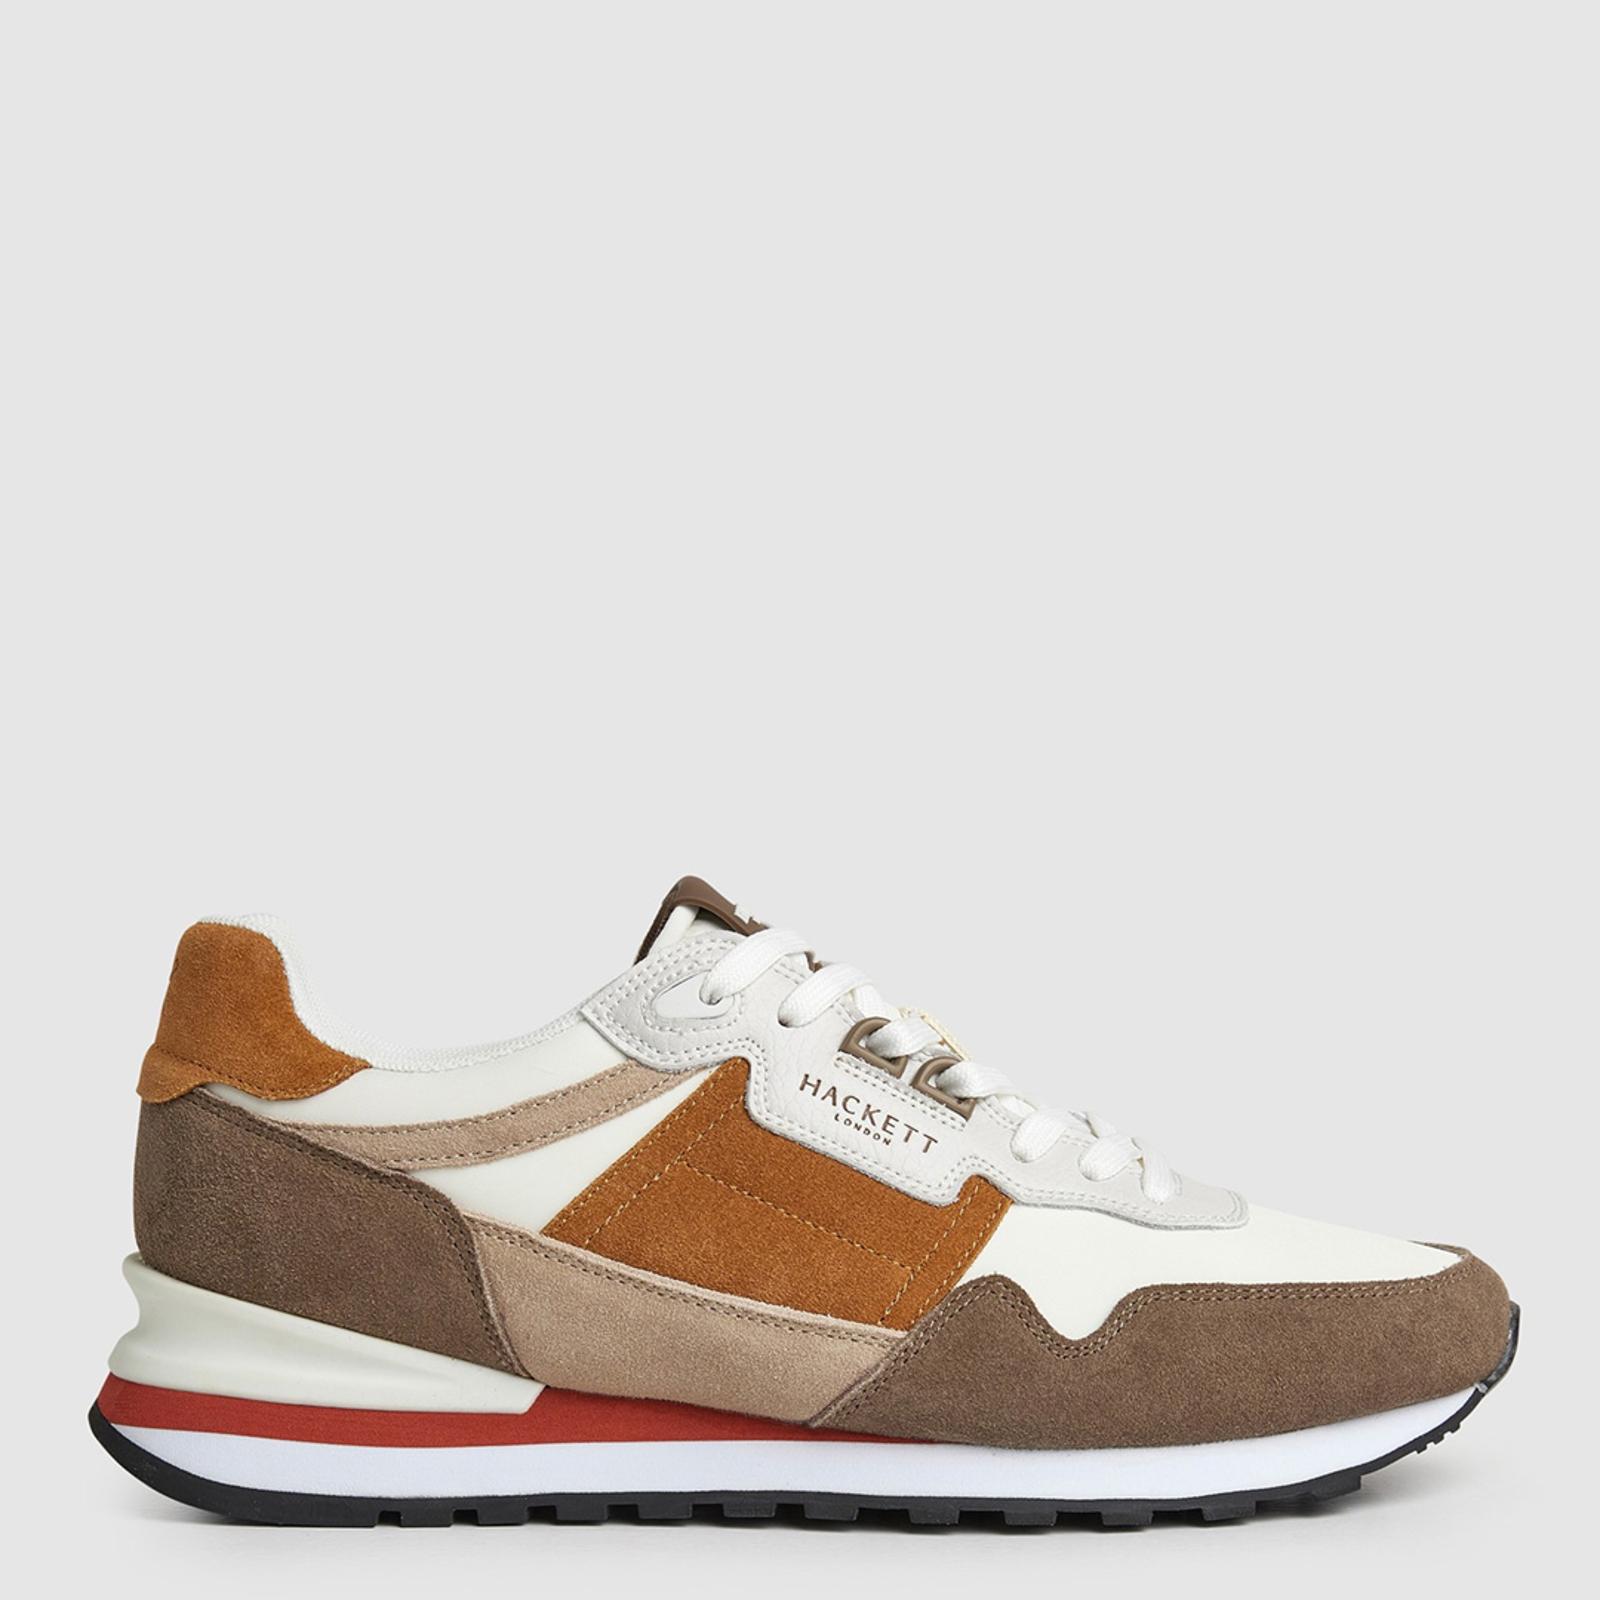 Camel Telfor Suede Leather Trainers - BrandAlley